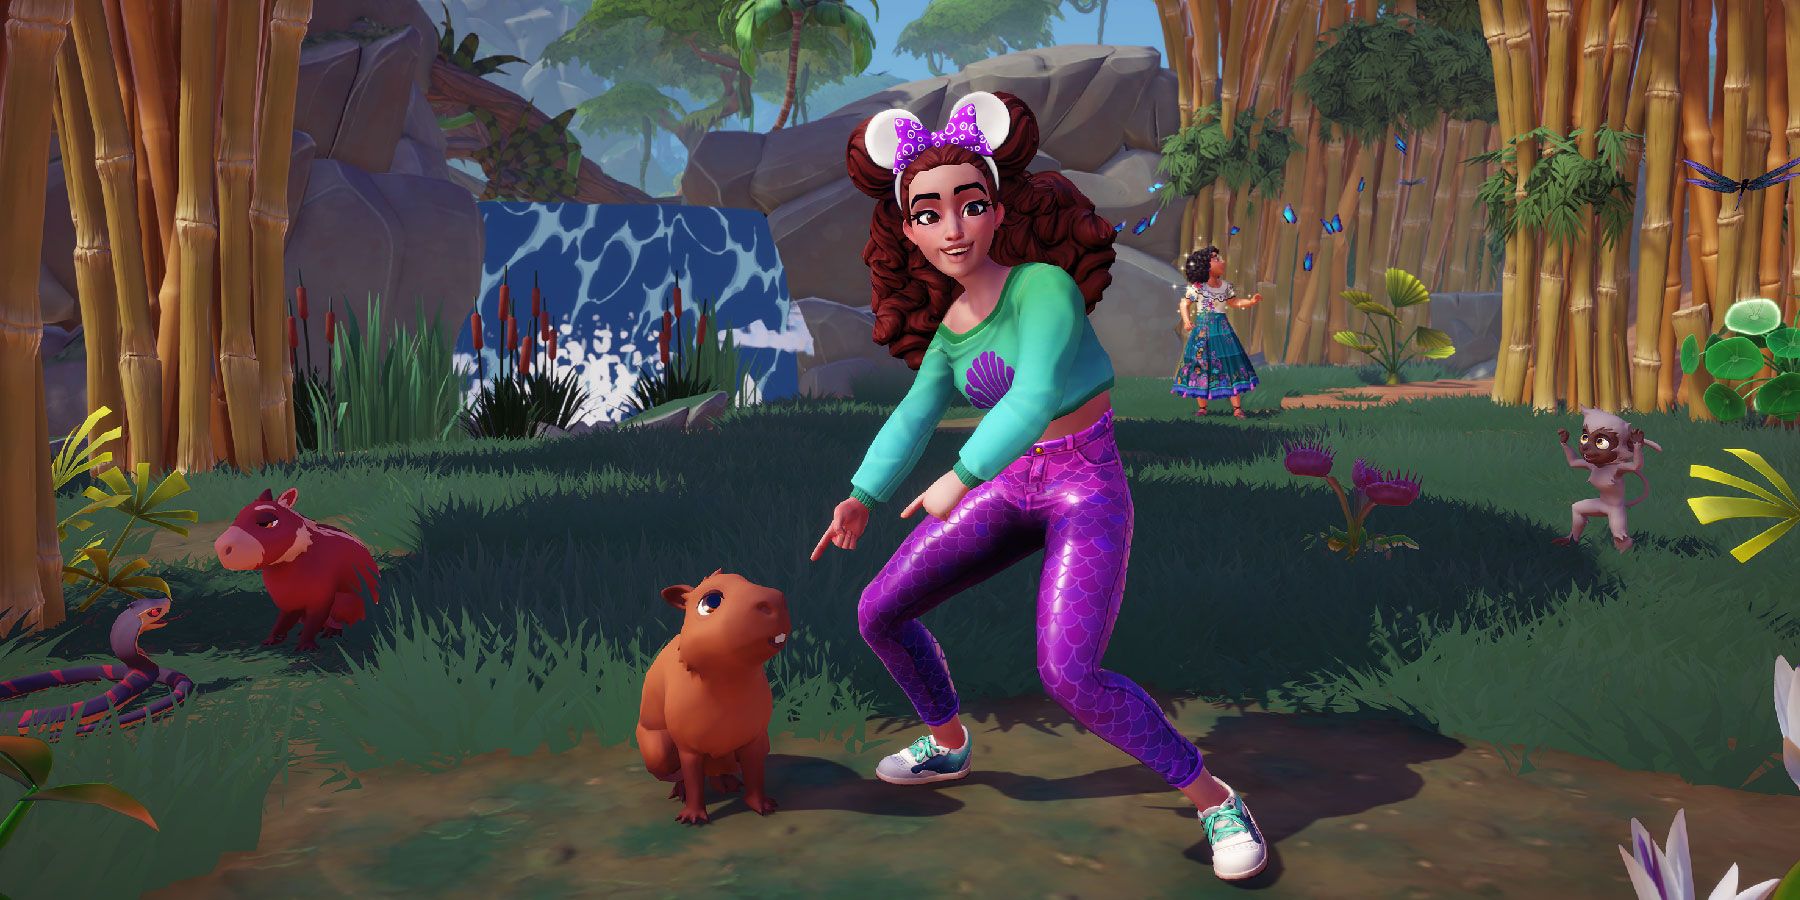 Finding capybara with Mirabel in Disney Dreamlight Valley.